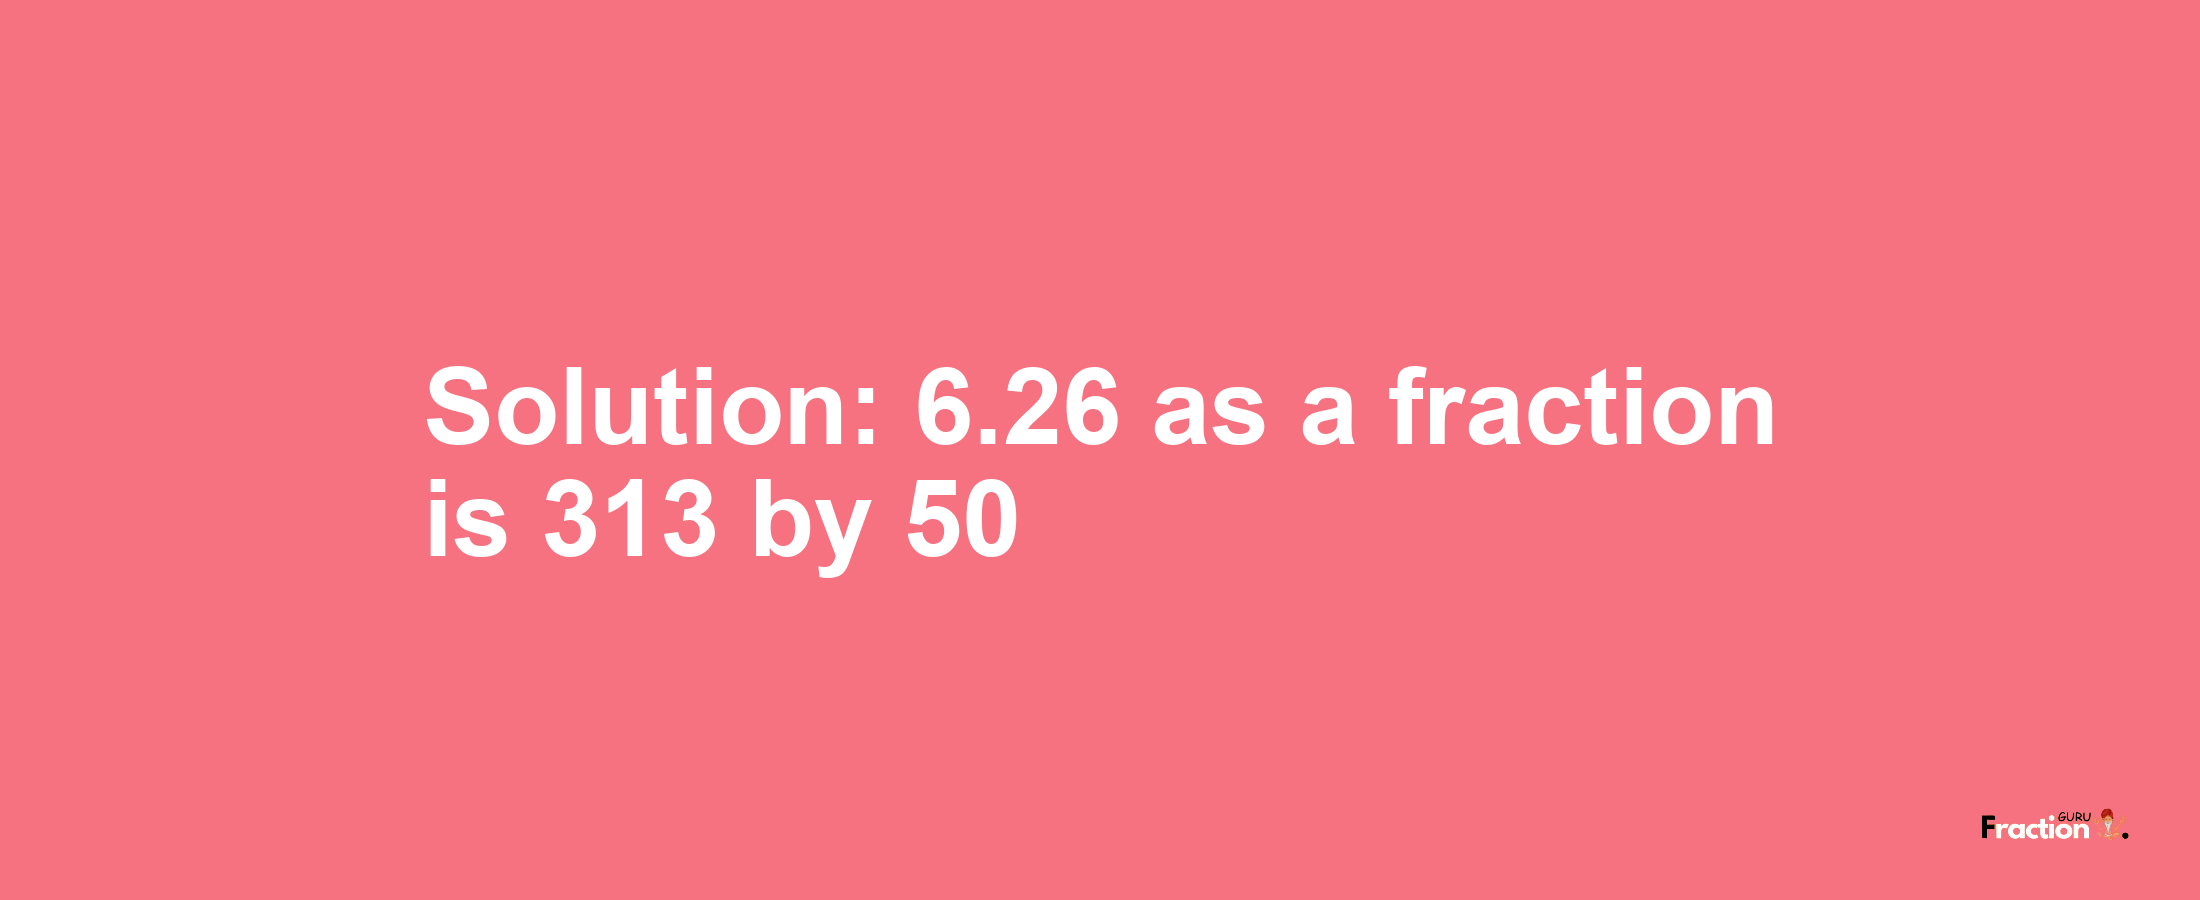 Solution:6.26 as a fraction is 313/50